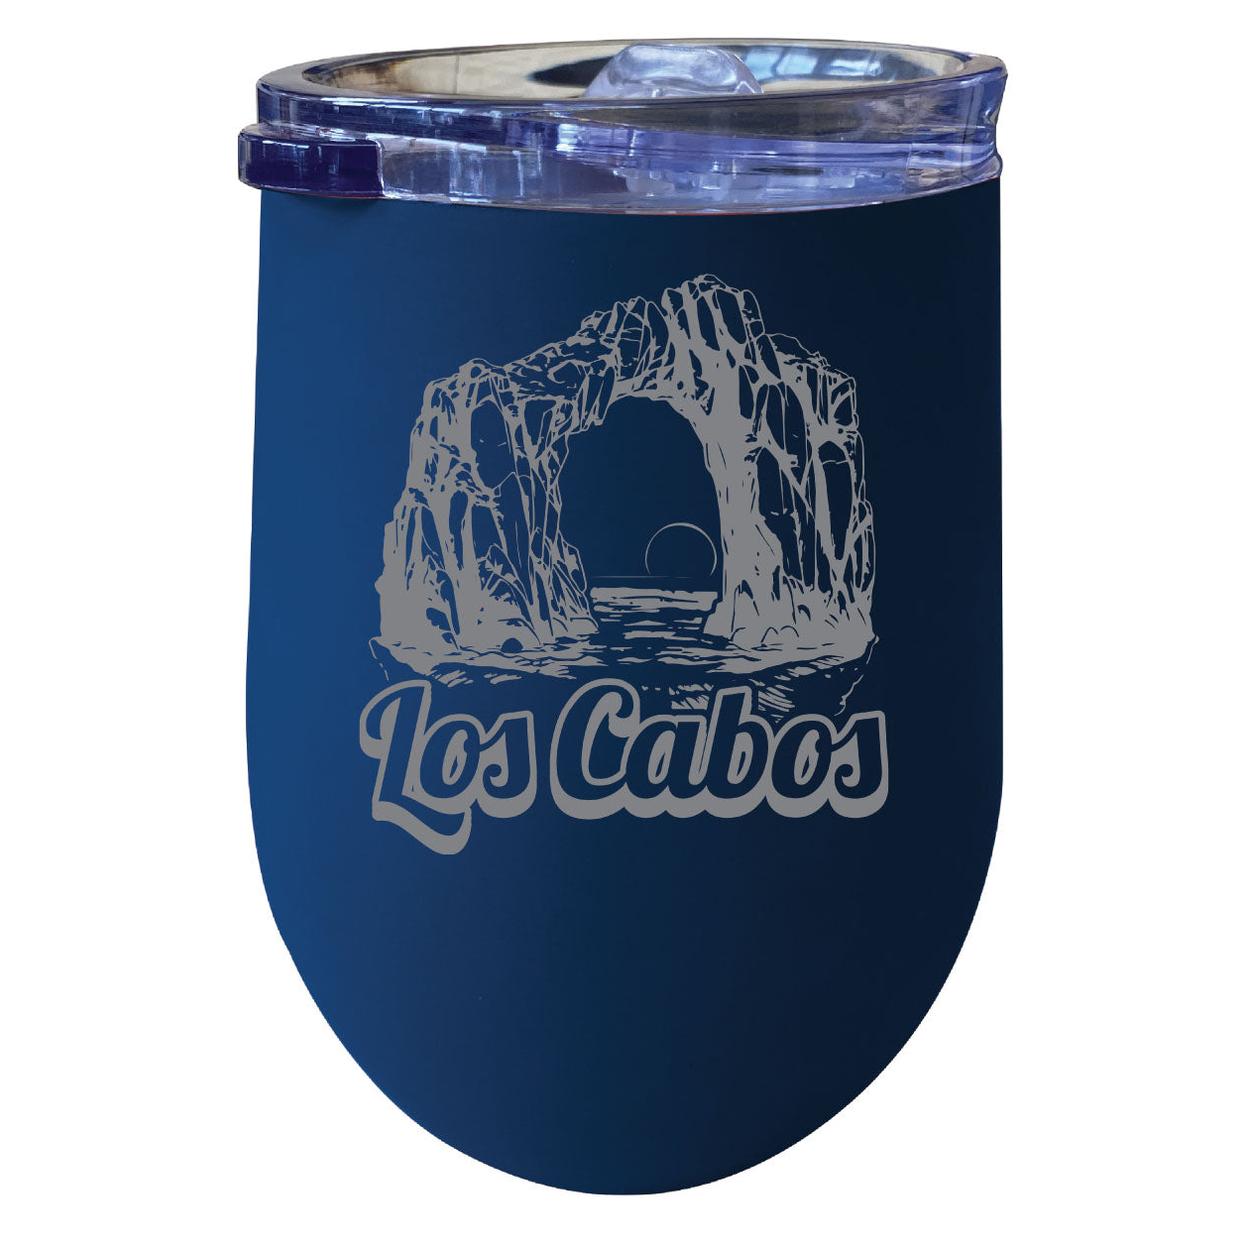 Los Cabos Mexico Souvenir 12 Oz Engraved Insulated Wine Stainless Steel Tumbler - Navy,,2-Pack